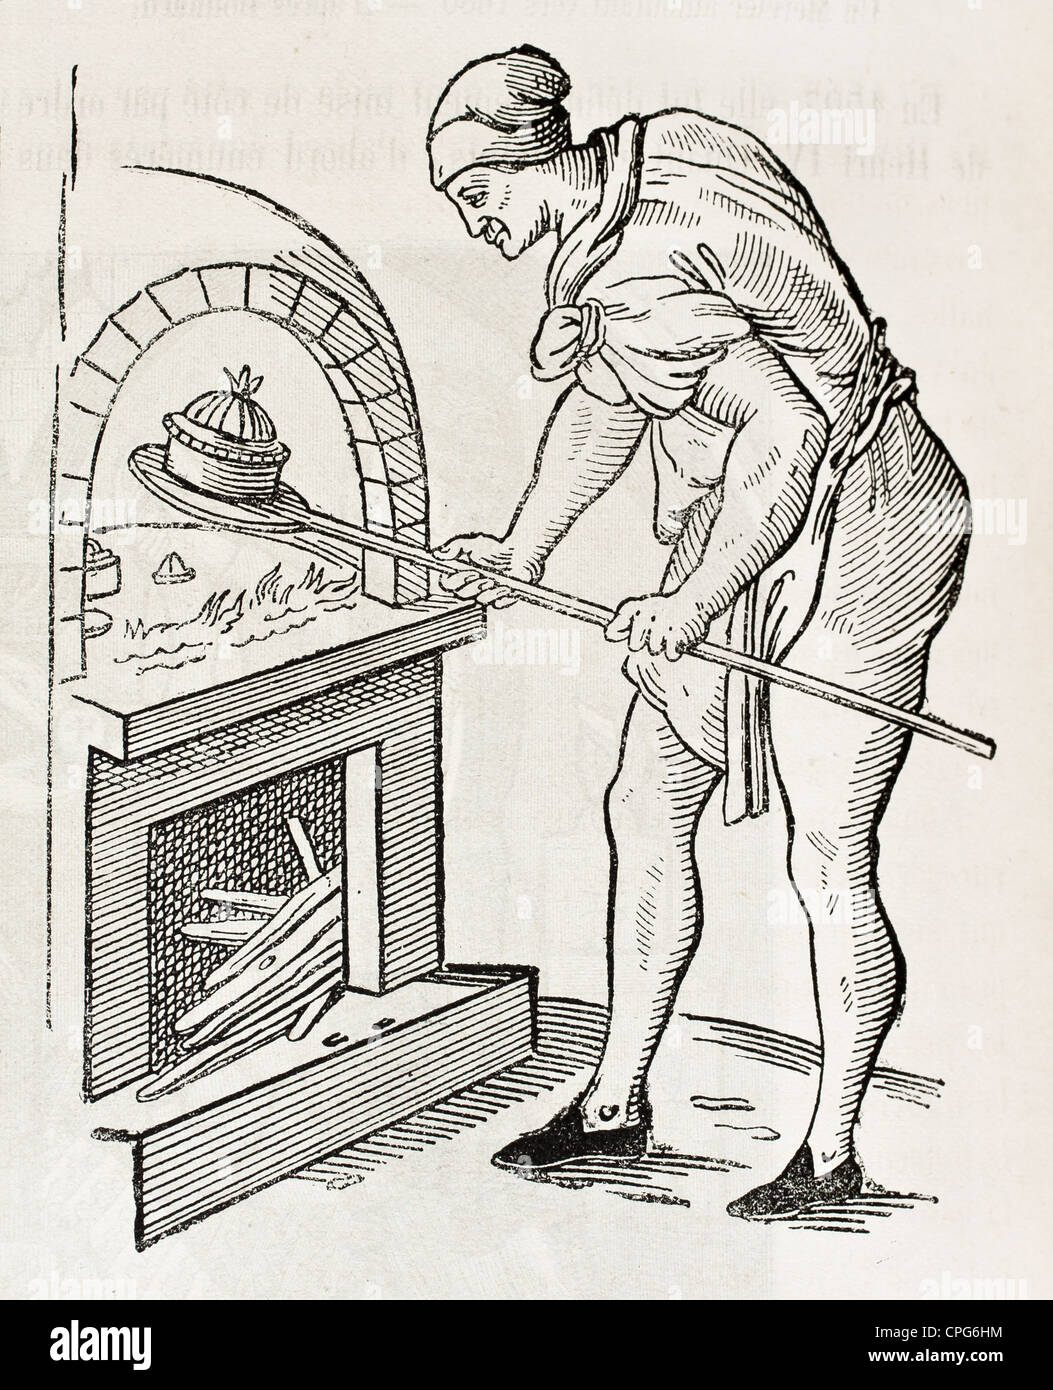 Pastry Chef in 1589, old illustration Stock Photo